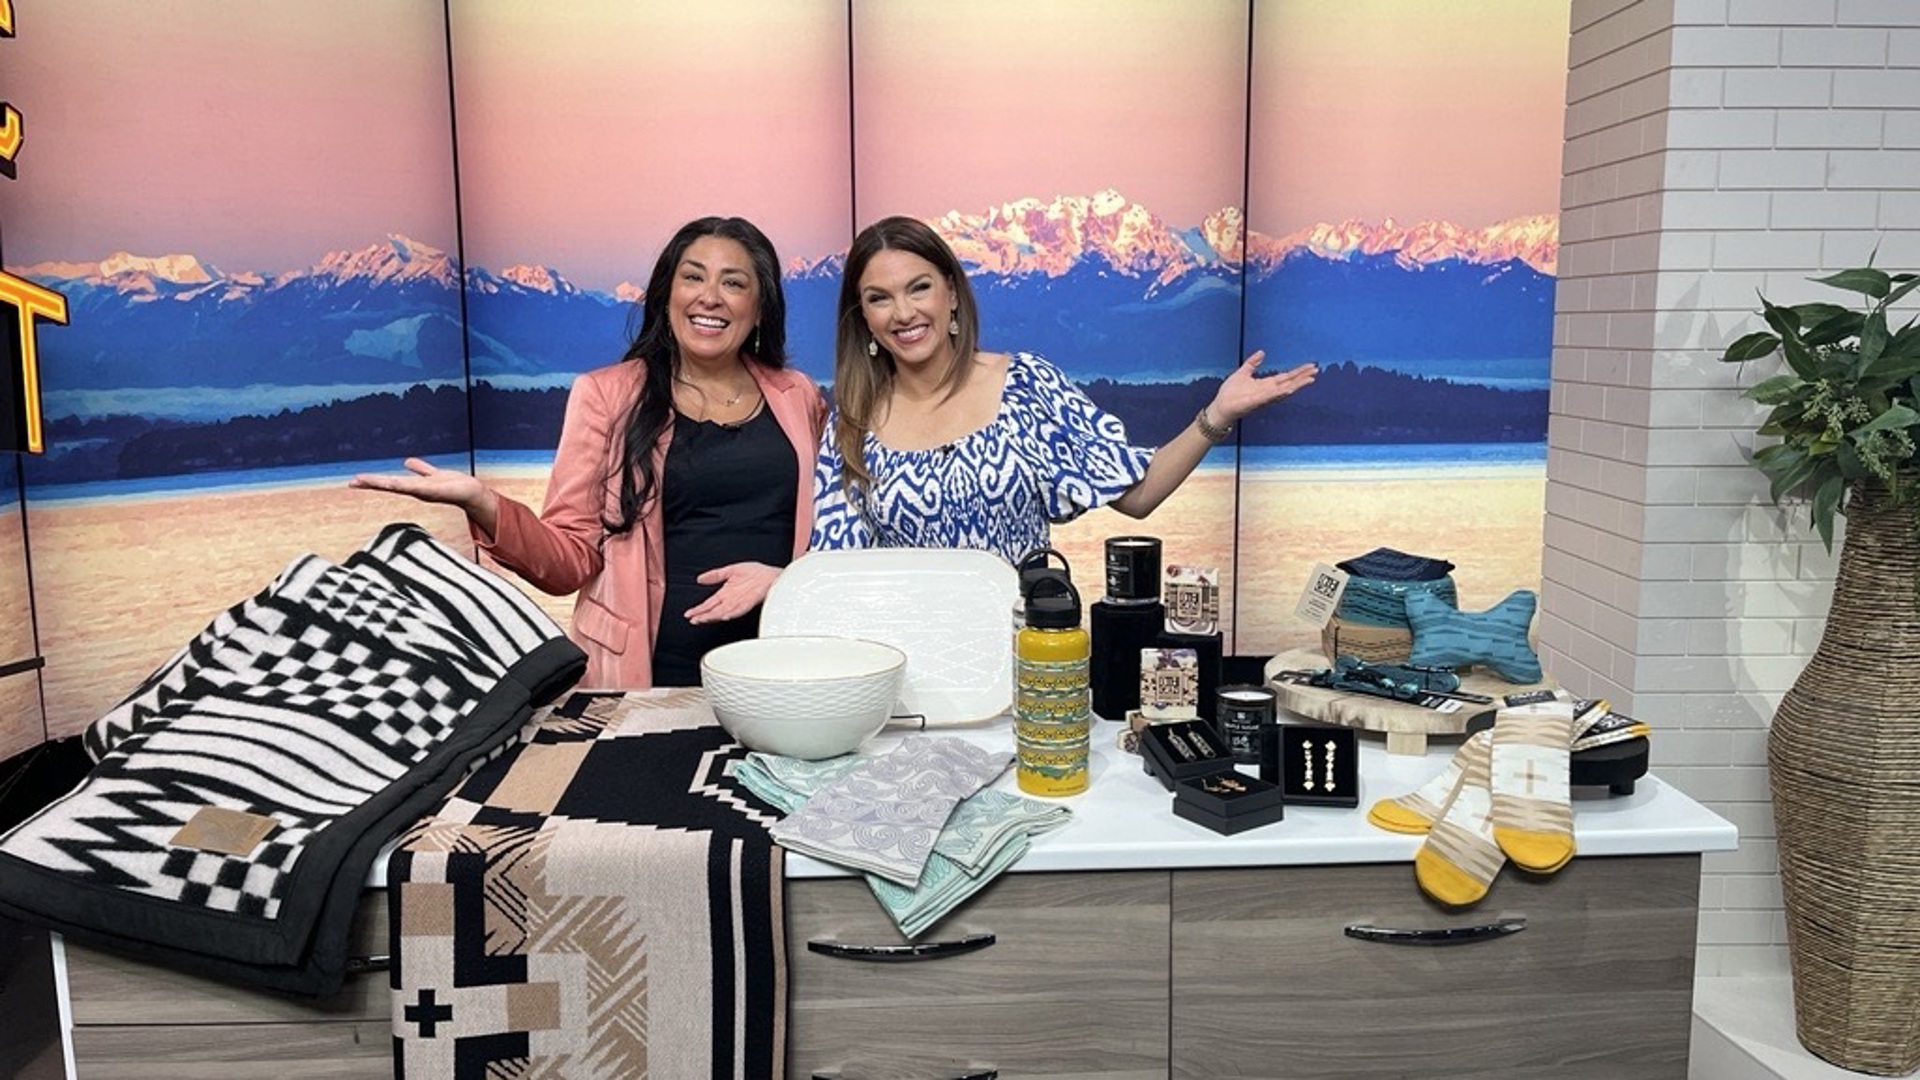 Eighth Generation is a Seattle based art and lifestyle brand that partners with several Native artists. #newdaynw